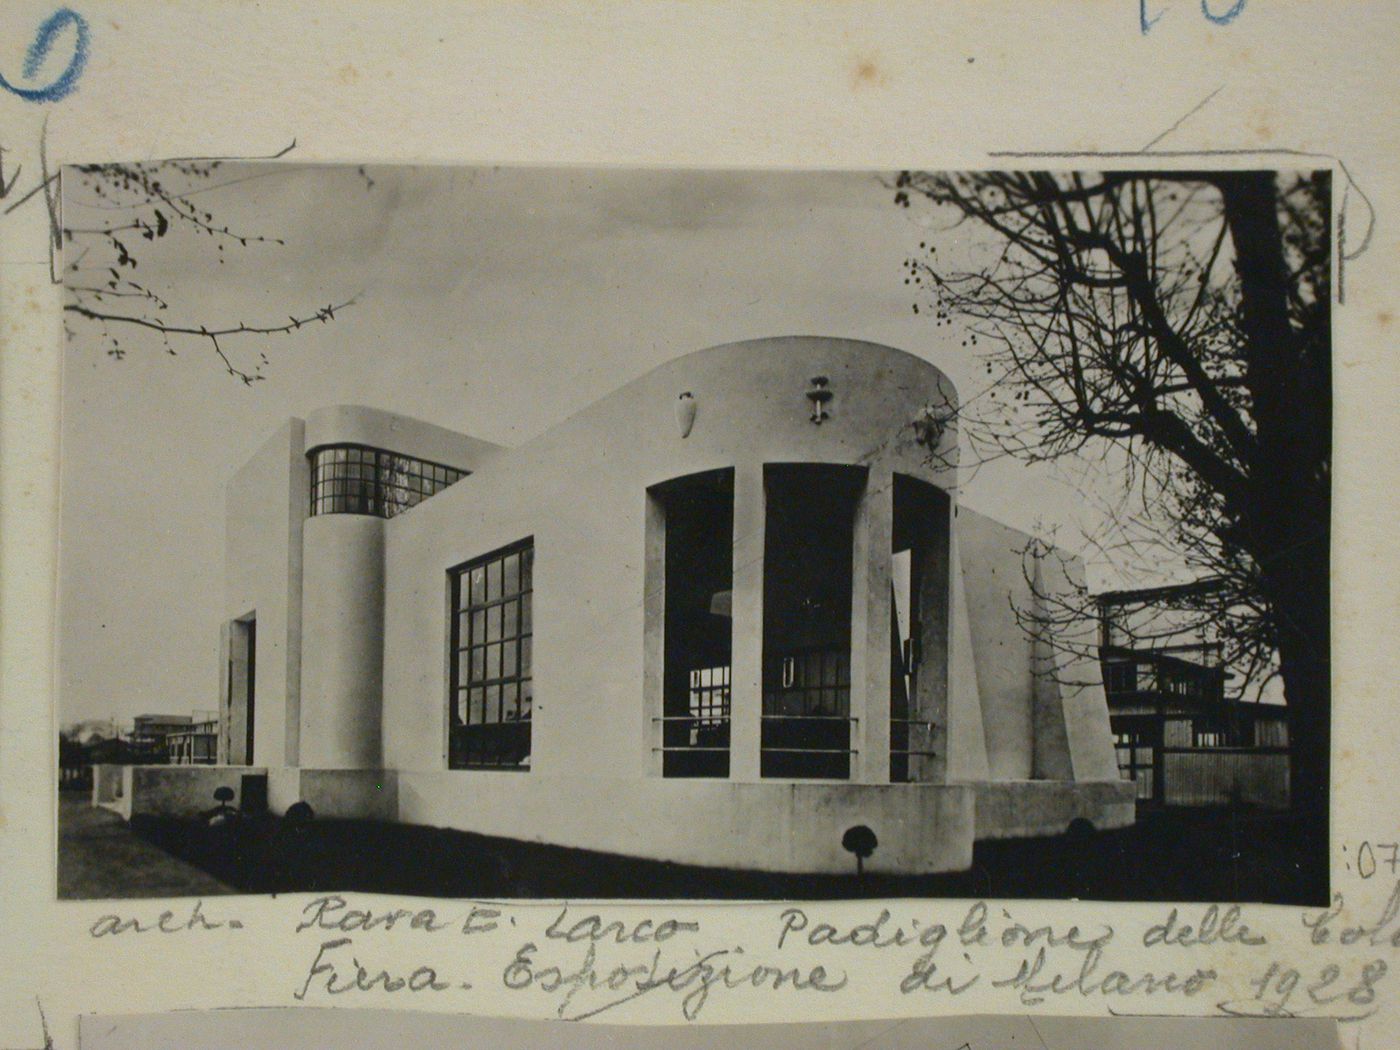 View of the Pavilion of Colonies at the 1928 Exhibition Fair in Milan, Italy